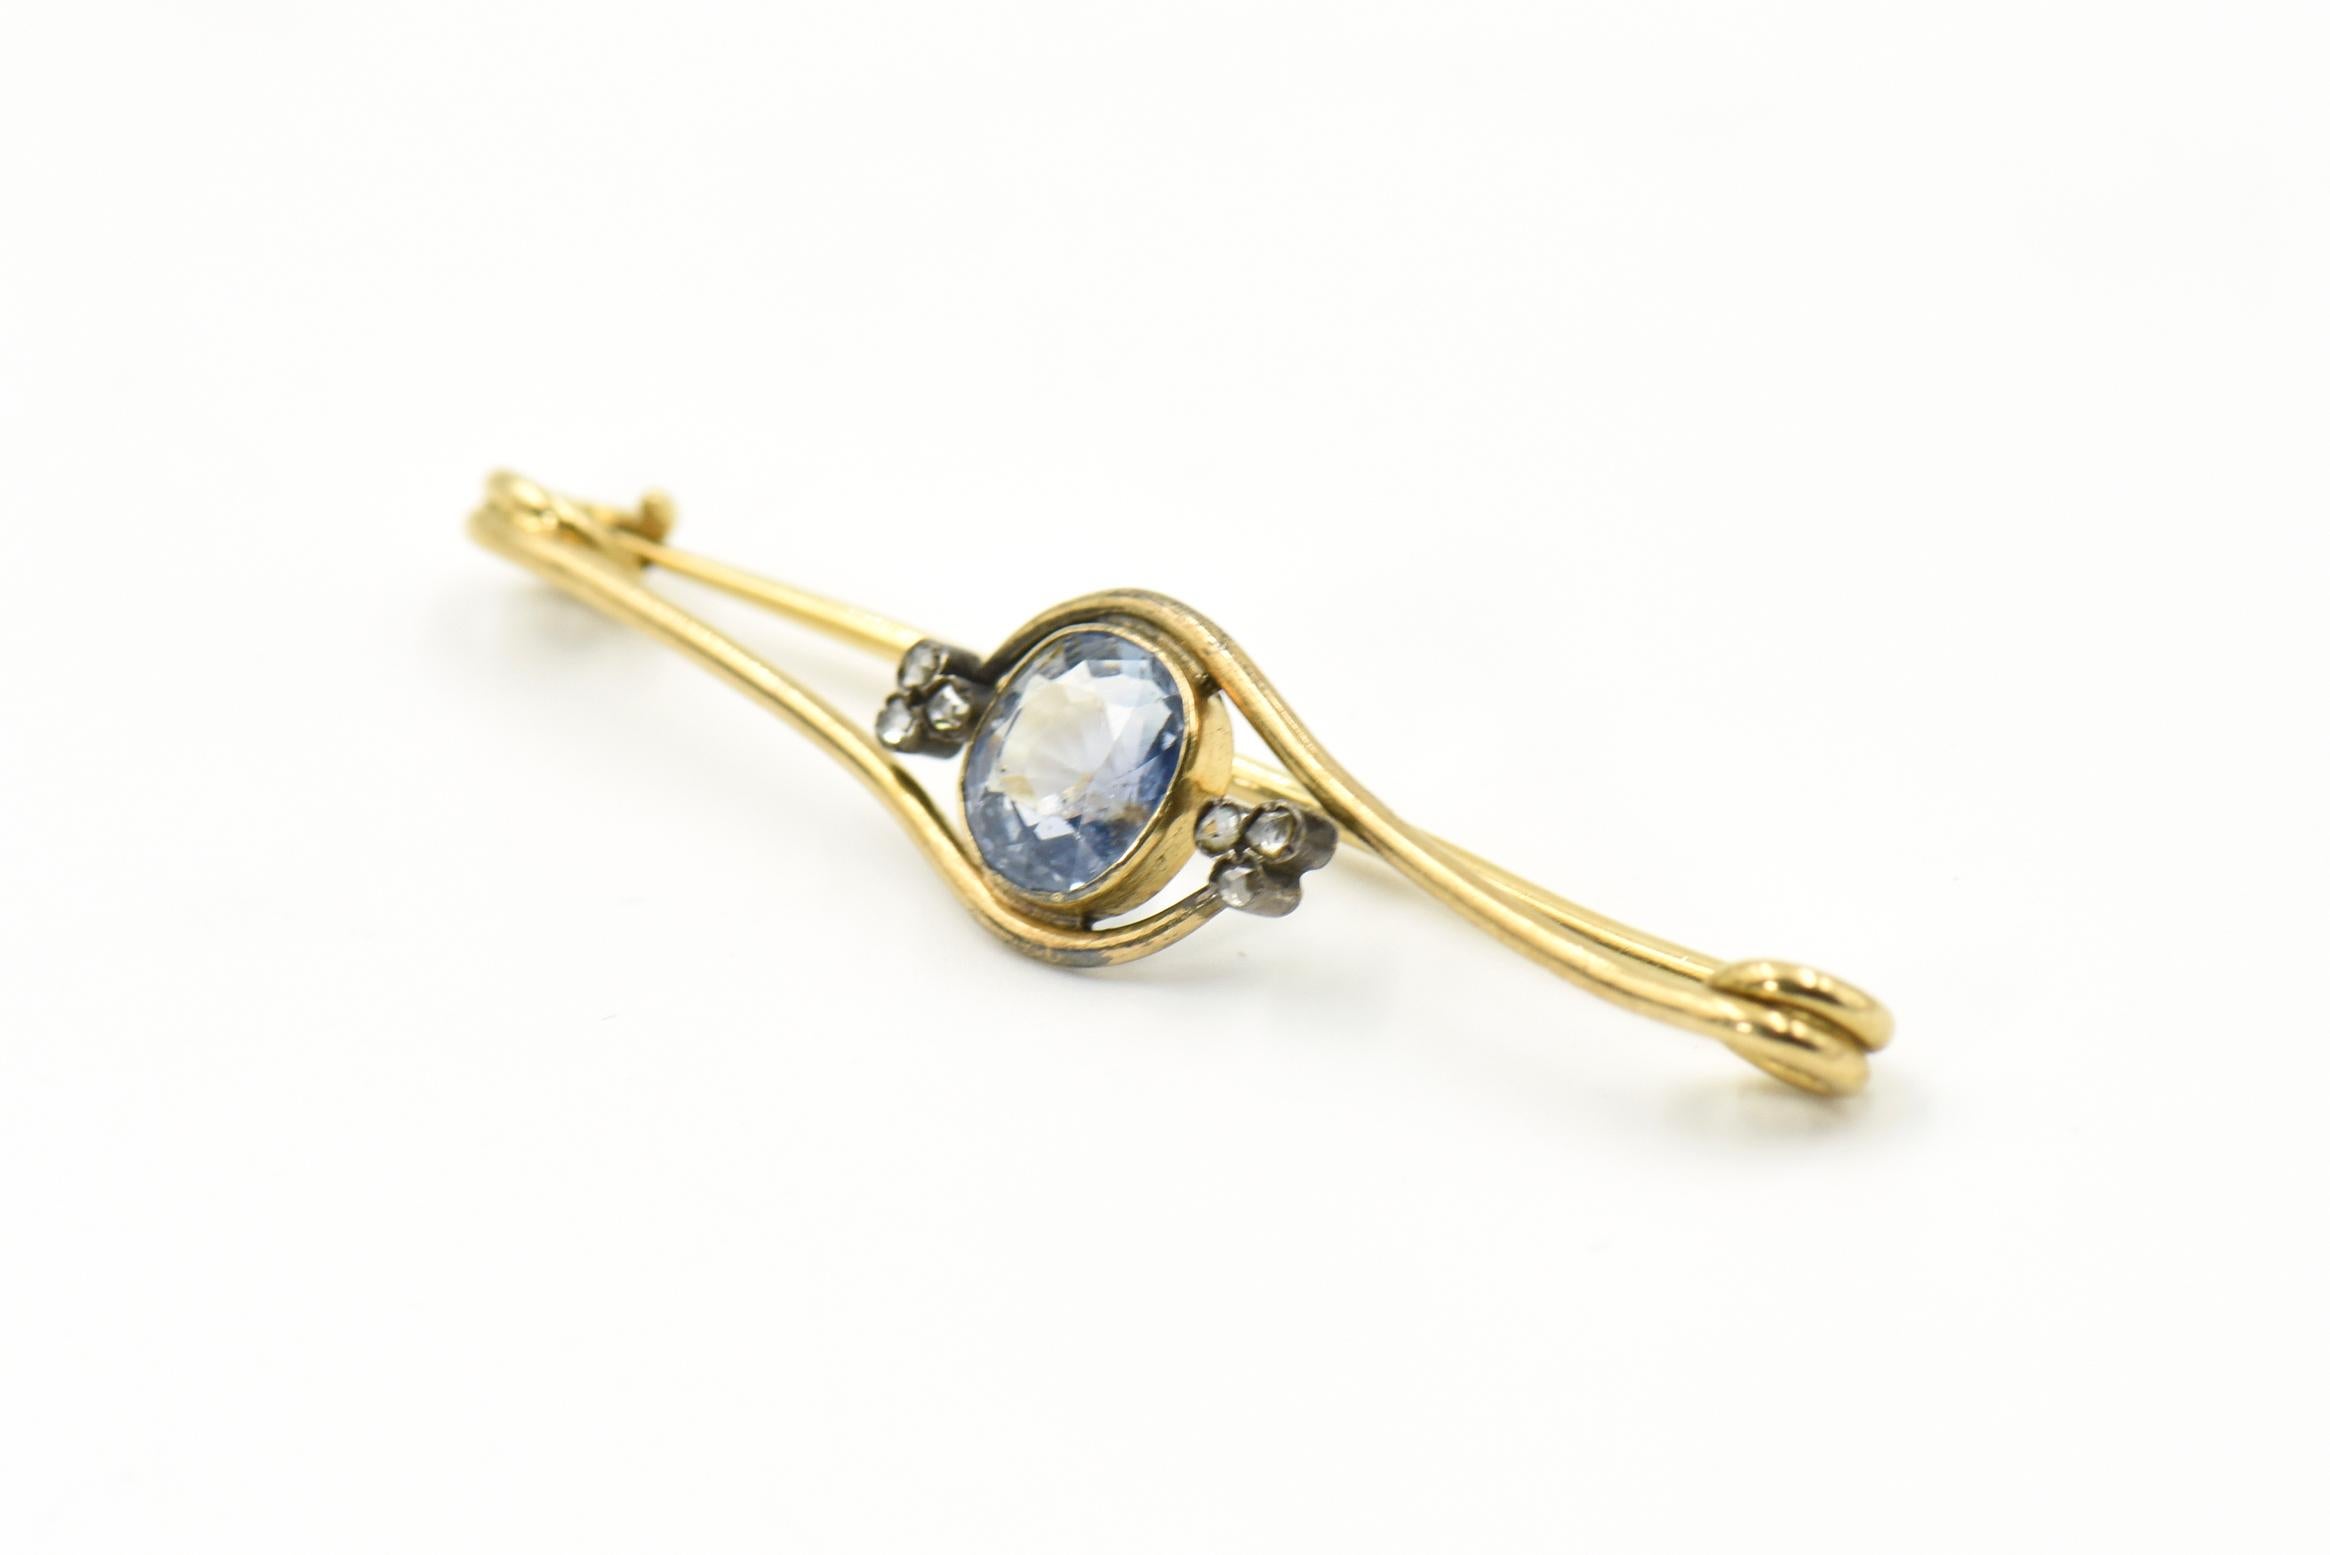 Antique bar pin featuring an antique cushion cut light blue faceted Sri Lanka Sapphire (approximately 2.59 carats) bezel set suspended by three leaf clover boarders terminating with rose cut diamond buds.   The edges are gold coils similar to a